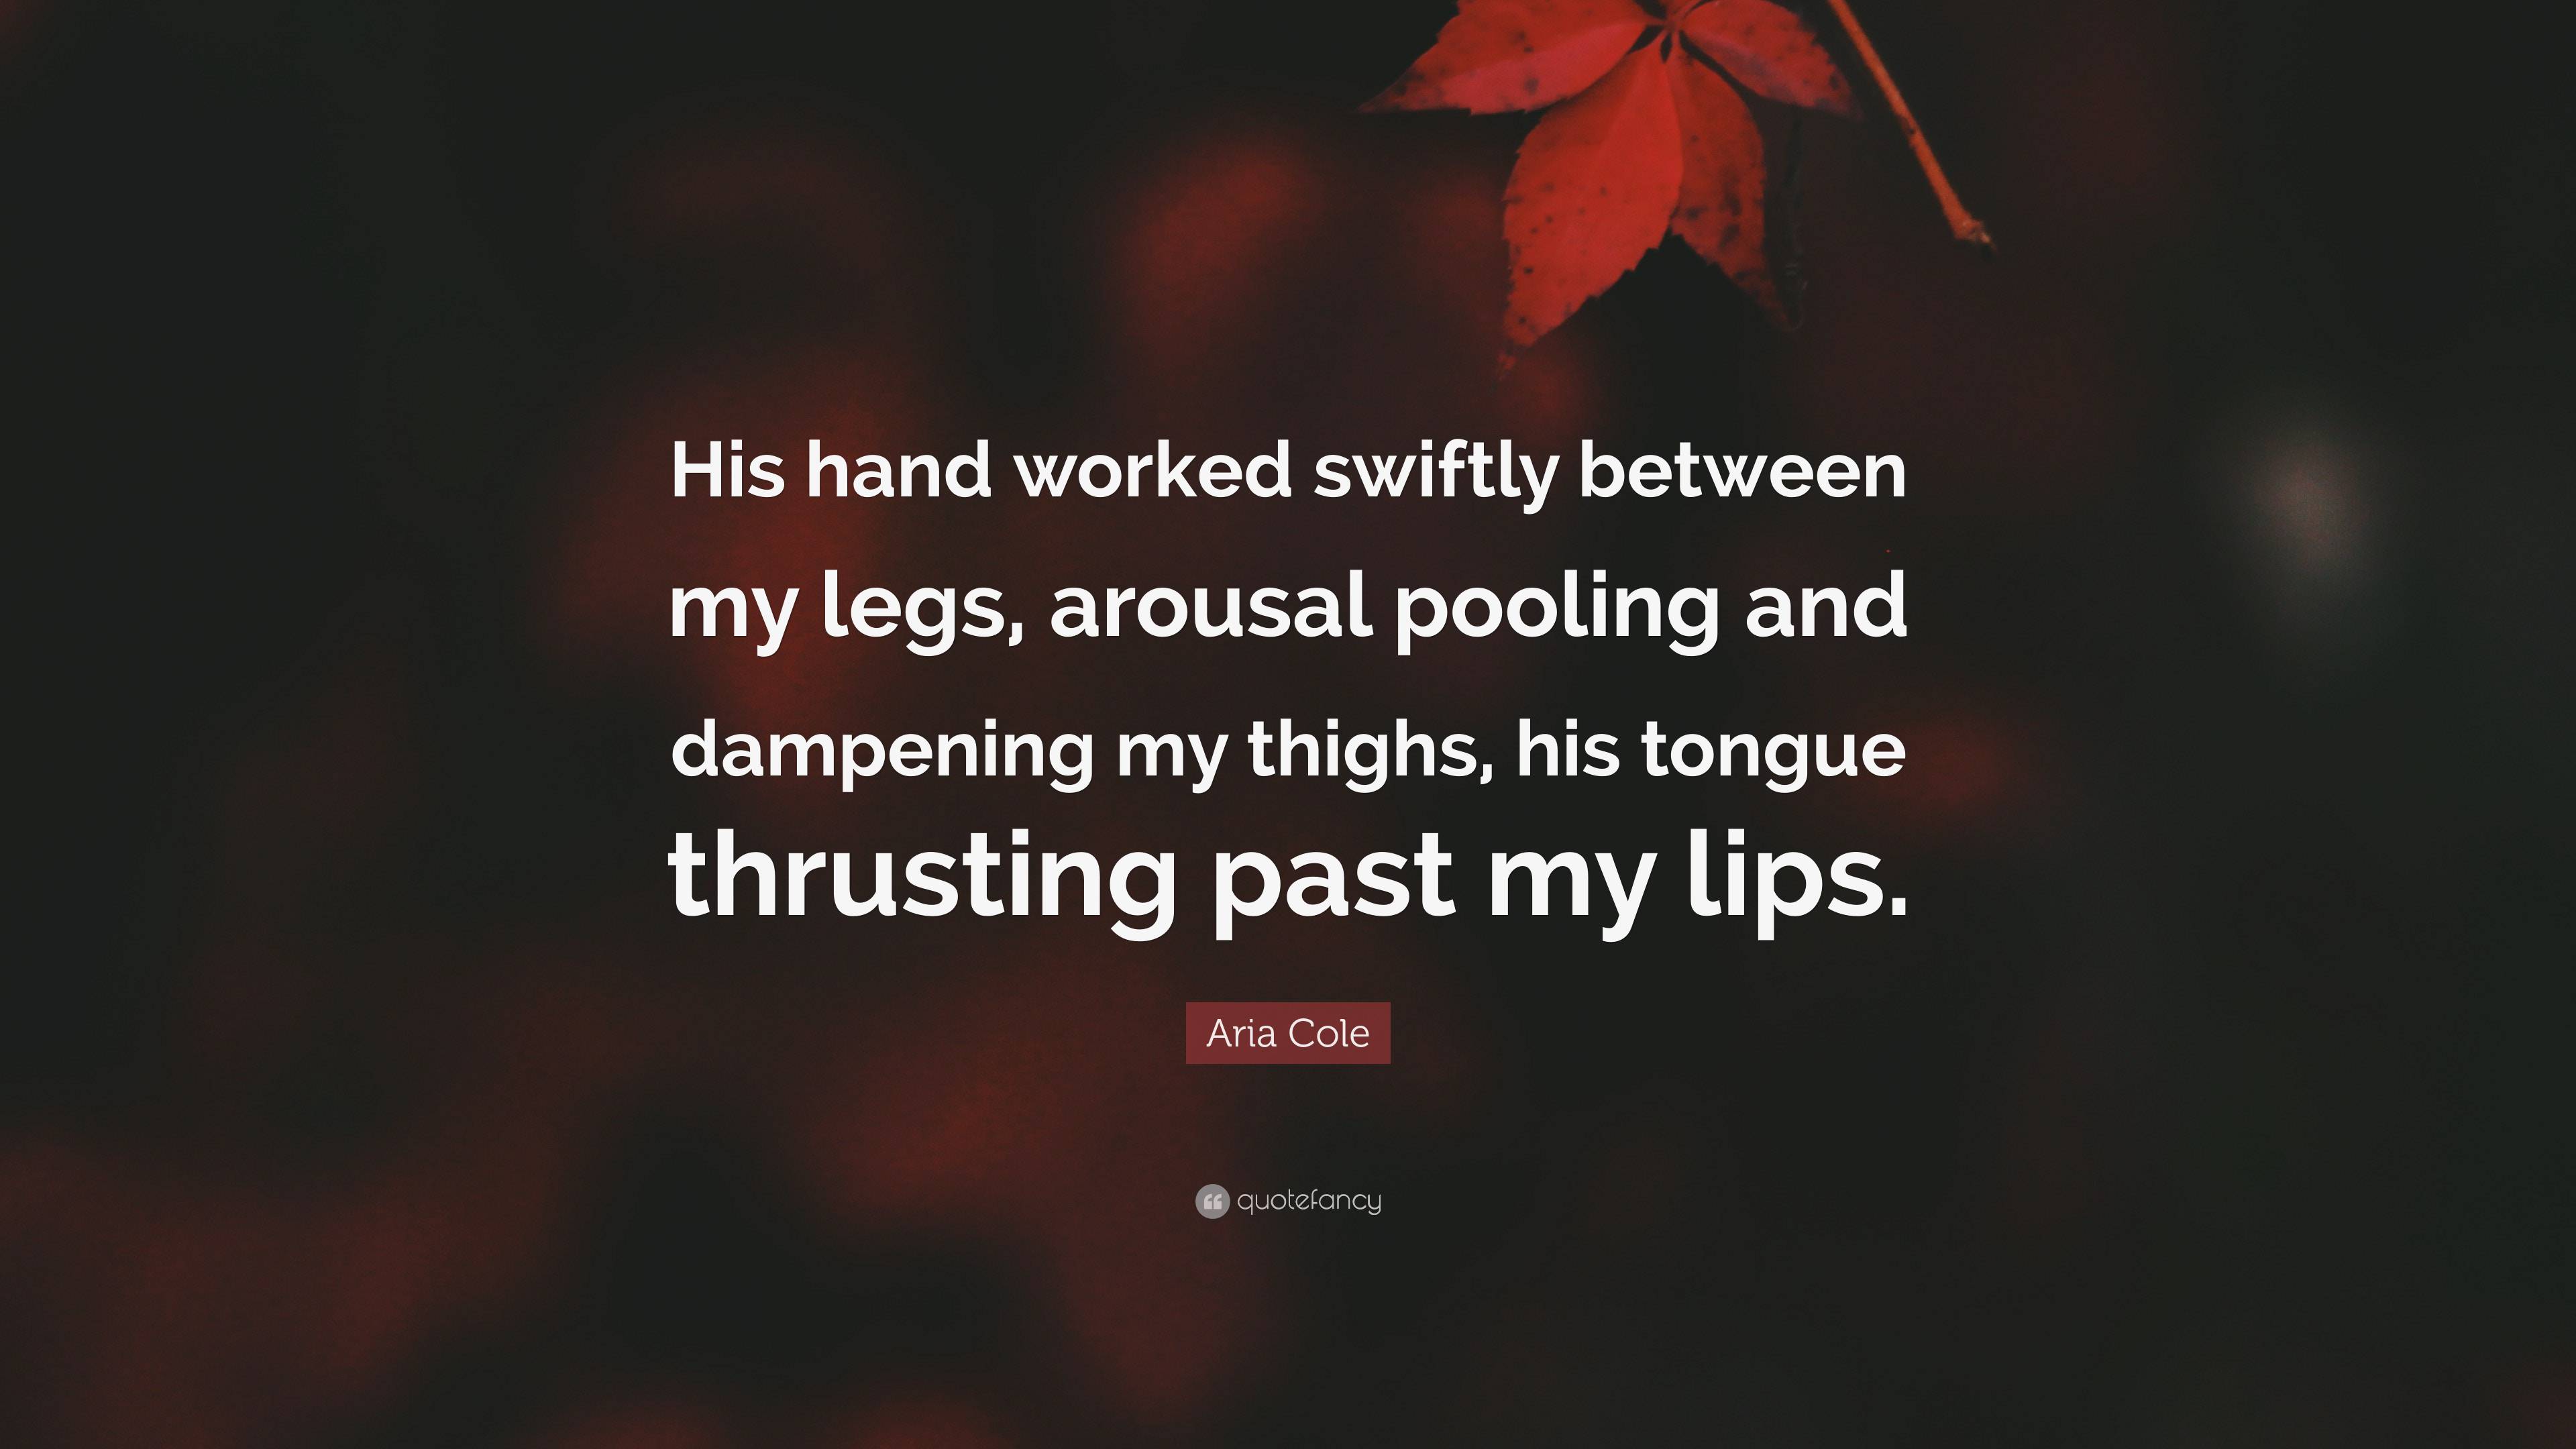 Aria Cole Quote: “His hand worked swiftly between my legs, arousal pooling  and dampening my thighs